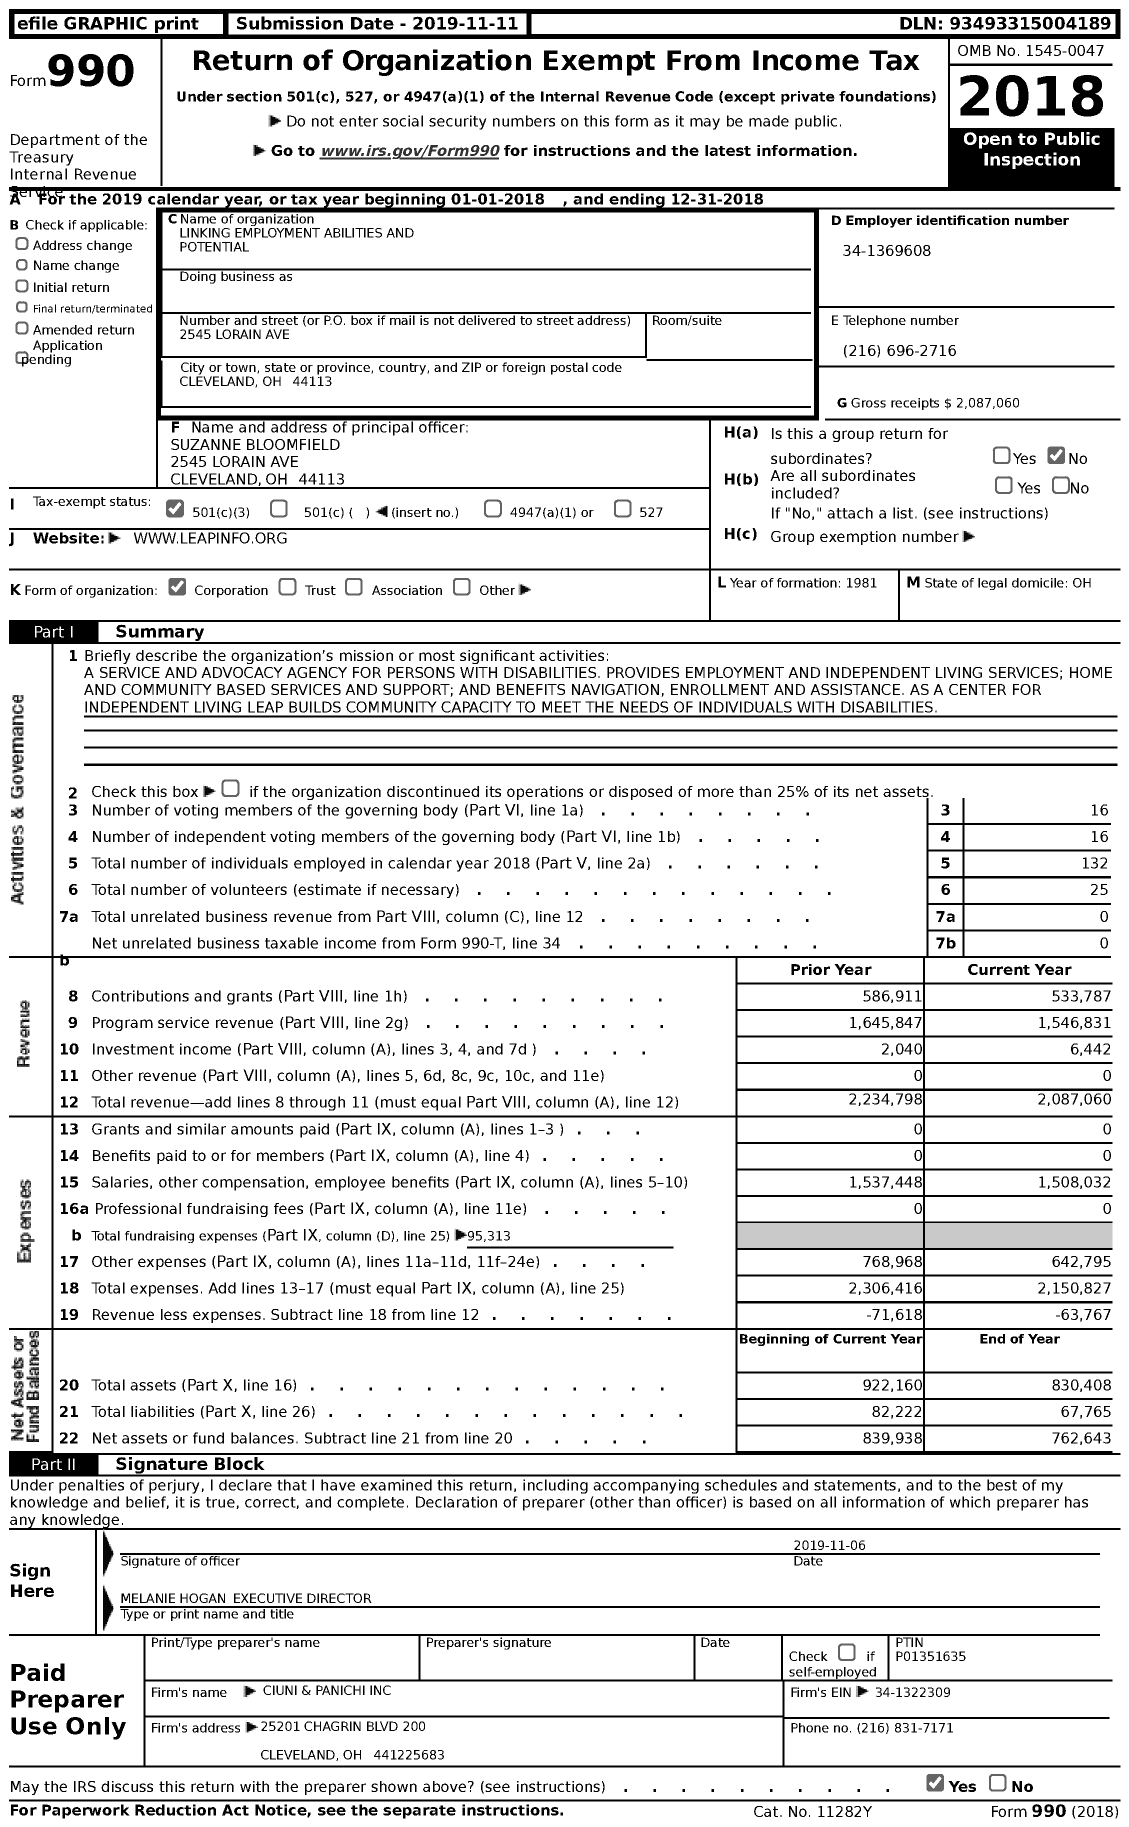 Image of first page of 2018 Form 990 for Linking Employment Abilities and Potential